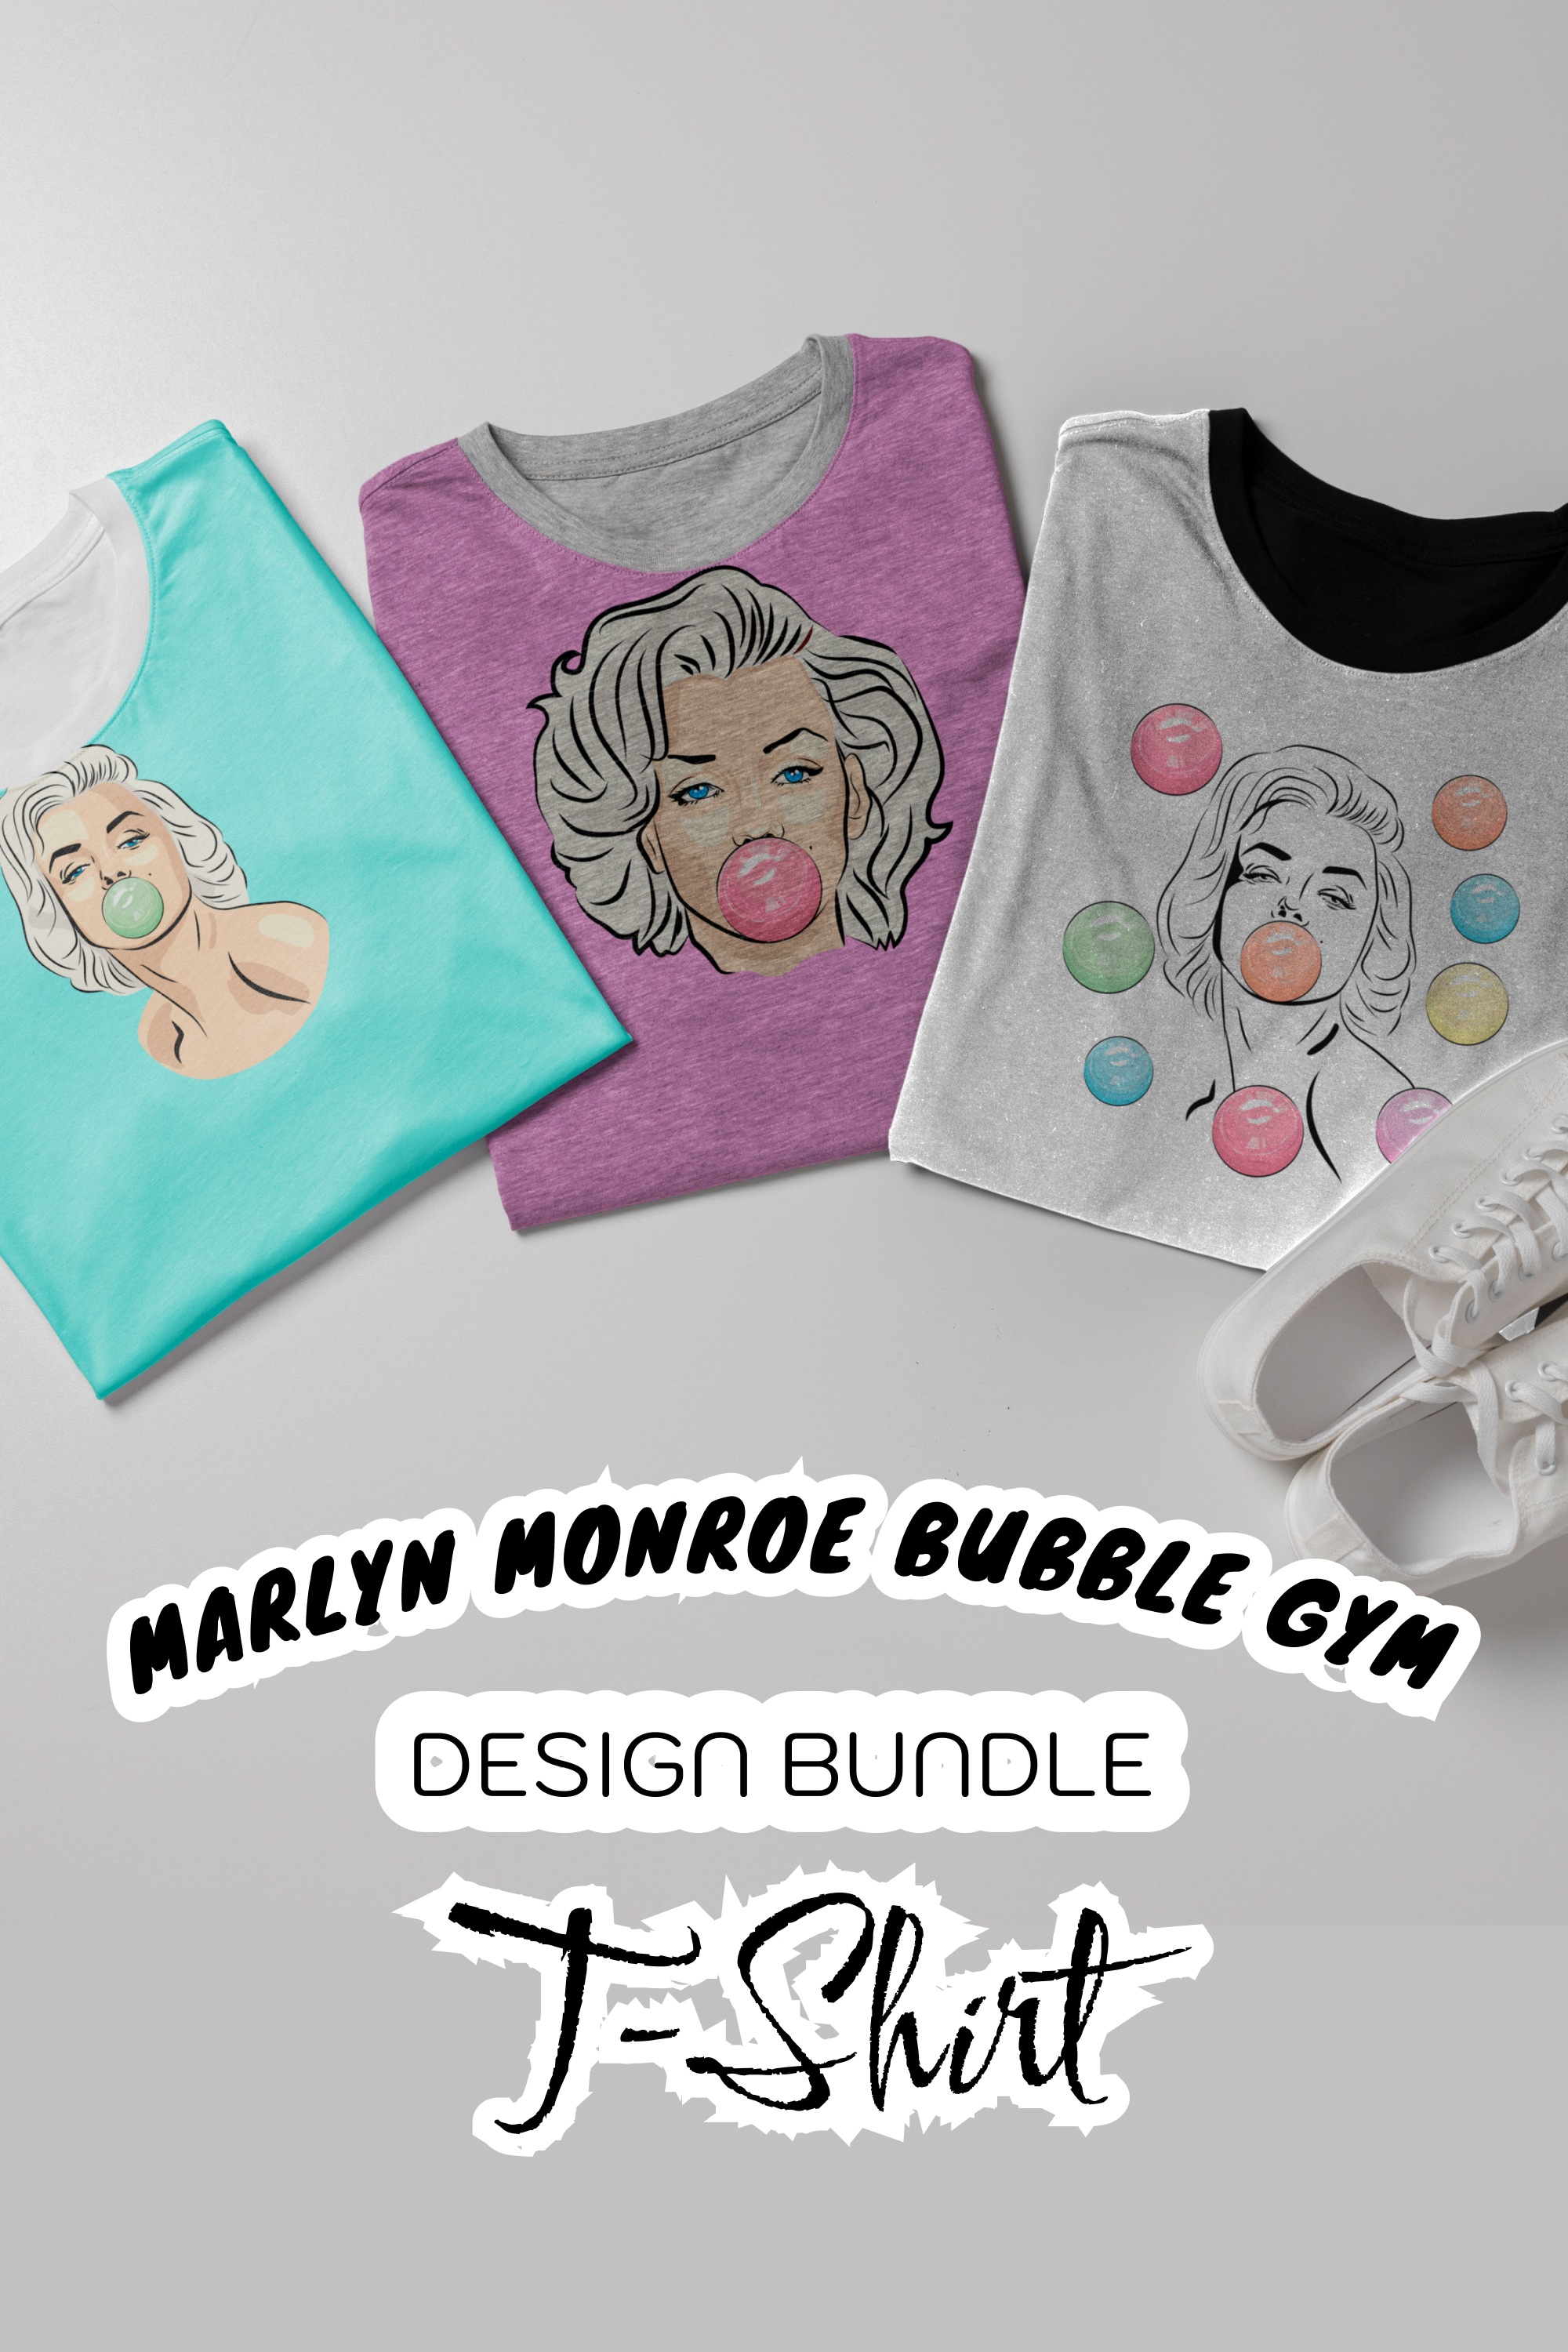 Collection of images of t-shirts with a beautiful print of Marilyn Monroe with bubble gum.